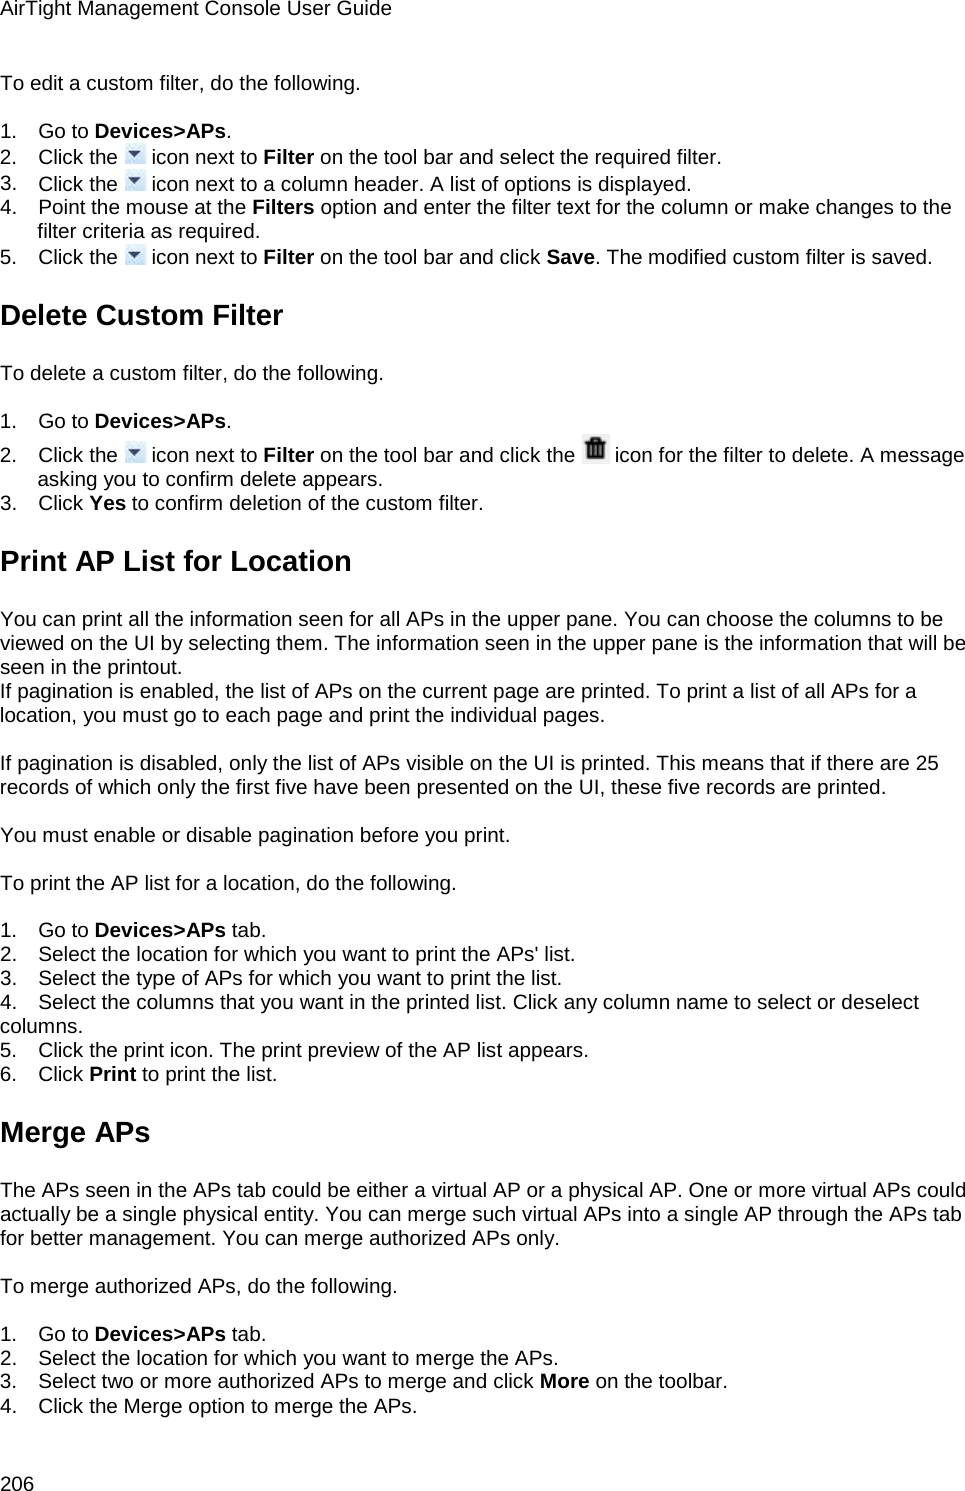 AirTight Management Console User Guide 206 To edit a custom filter, do the following.   1.      Go to Devices&gt;APs. 2.      Click the   icon next to Filter on the tool bar and select the required filter.  3.      Click the   icon next to a column header. A list of options is displayed. 4.      Point the mouse at the Filters option and enter the filter text for the column or make changes to the filter criteria as required. 5.      Click the   icon next to Filter on the tool bar and click Save. The modified custom filter is saved. Delete Custom Filter To delete a custom filter, do the following.   1.      Go to Devices&gt;APs. 2.      Click the   icon next to Filter on the tool bar and click the   icon for the filter to delete. A message asking you to confirm delete appears. 3.      Click Yes to confirm deletion of the custom filter. Print AP List for Location You can print all the information seen for all APs in the upper pane. You can choose the columns to be viewed on the UI by selecting them. The information seen in the upper pane is the information that will be seen in the printout. If pagination is enabled, the list of APs on the current page are printed. To print a list of all APs for a location, you must go to each page and print the individual pages.   If pagination is disabled, only the list of APs visible on the UI is printed. This means that if there are 25 records of which only the first five have been presented on the UI, these five records are printed.    You must enable or disable pagination before you print.   To print the AP list for a location, do the following.   1.      Go to Devices&gt;APs tab. 2.      Select the location for which you want to print the APs&apos; list. 3.      Select the type of APs for which you want to print the list. 4.      Select the columns that you want in the printed list. Click any column name to select or deselect columns. 5.      Click the print icon. The print preview of the AP list appears. 6.      Click Print to print the list. Merge APs The APs seen in the APs tab could be either a virtual AP or a physical AP. One or more virtual APs could actually be a single physical entity. You can merge such virtual APs into a single AP through the APs tab for better management. You can merge authorized APs only.   To merge authorized APs, do the following.   1.      Go to Devices&gt;APs tab. 2.      Select the location for which you want to merge the APs. 3.      Select two or more authorized APs to merge and click More on the toolbar.  4.      Click the Merge option to merge the APs. 